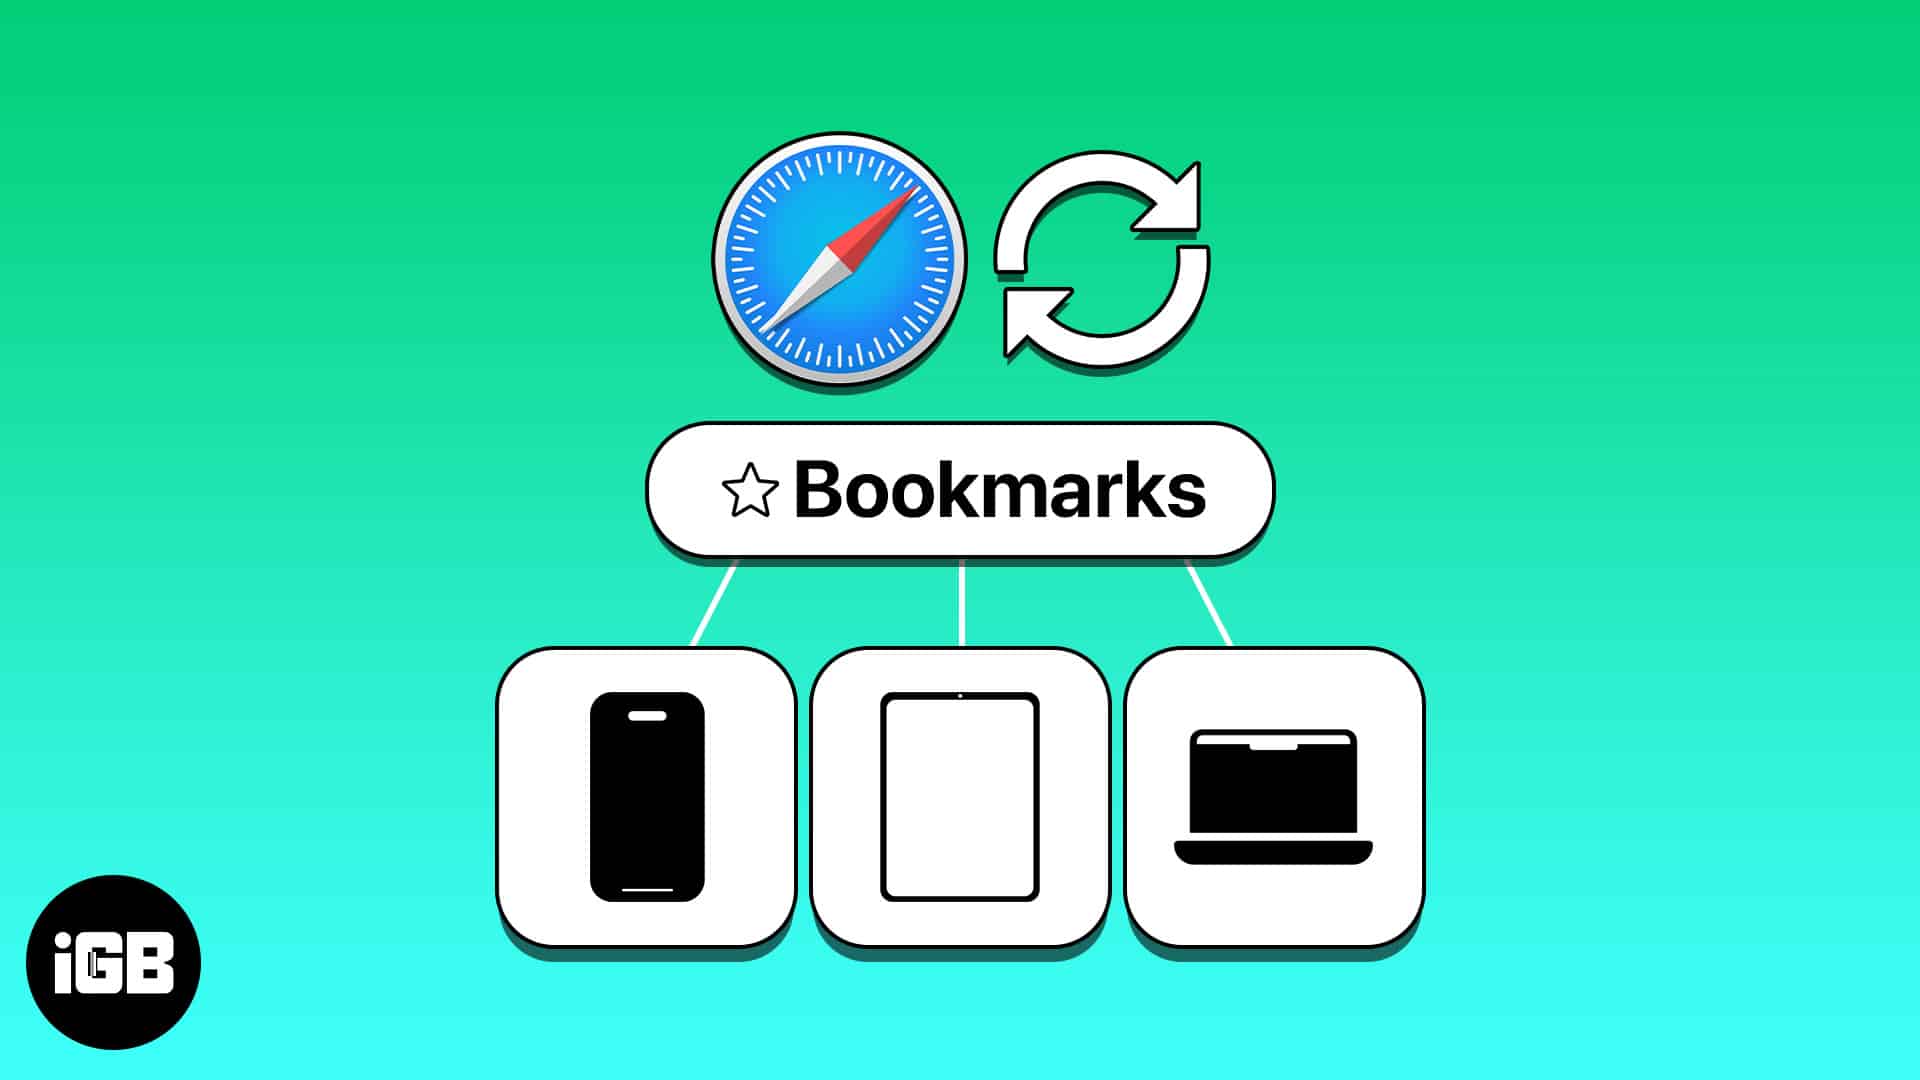 safari sync bookmarks between devices